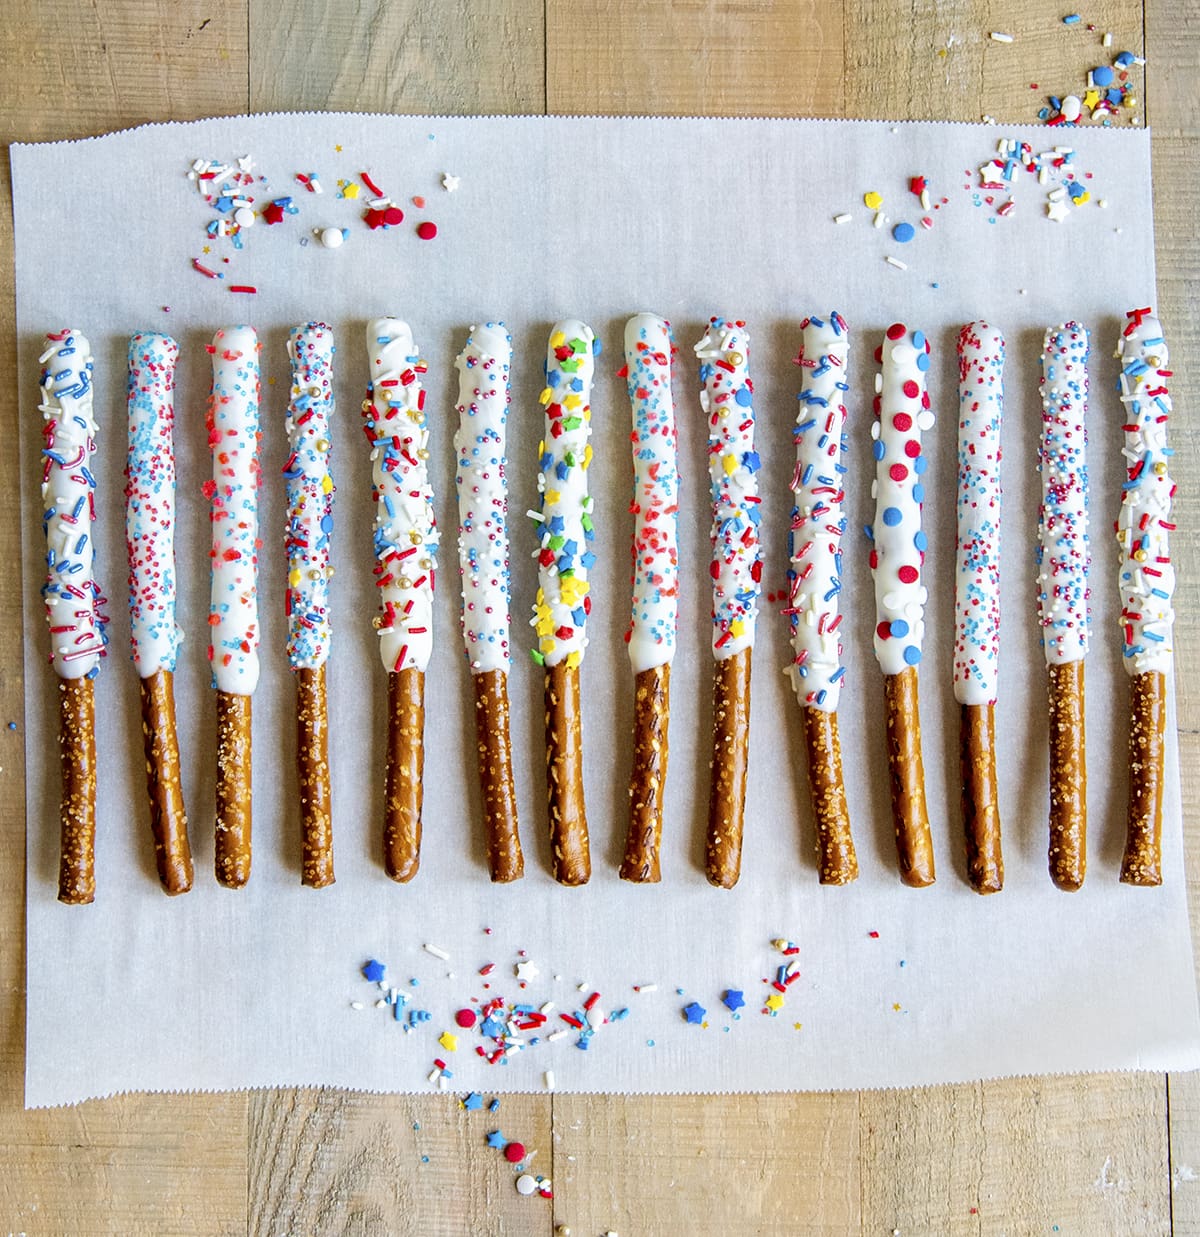 Pretzel rods dipped in white chocolate and topped with patriotic sprinkles on a piece of parchment paper.